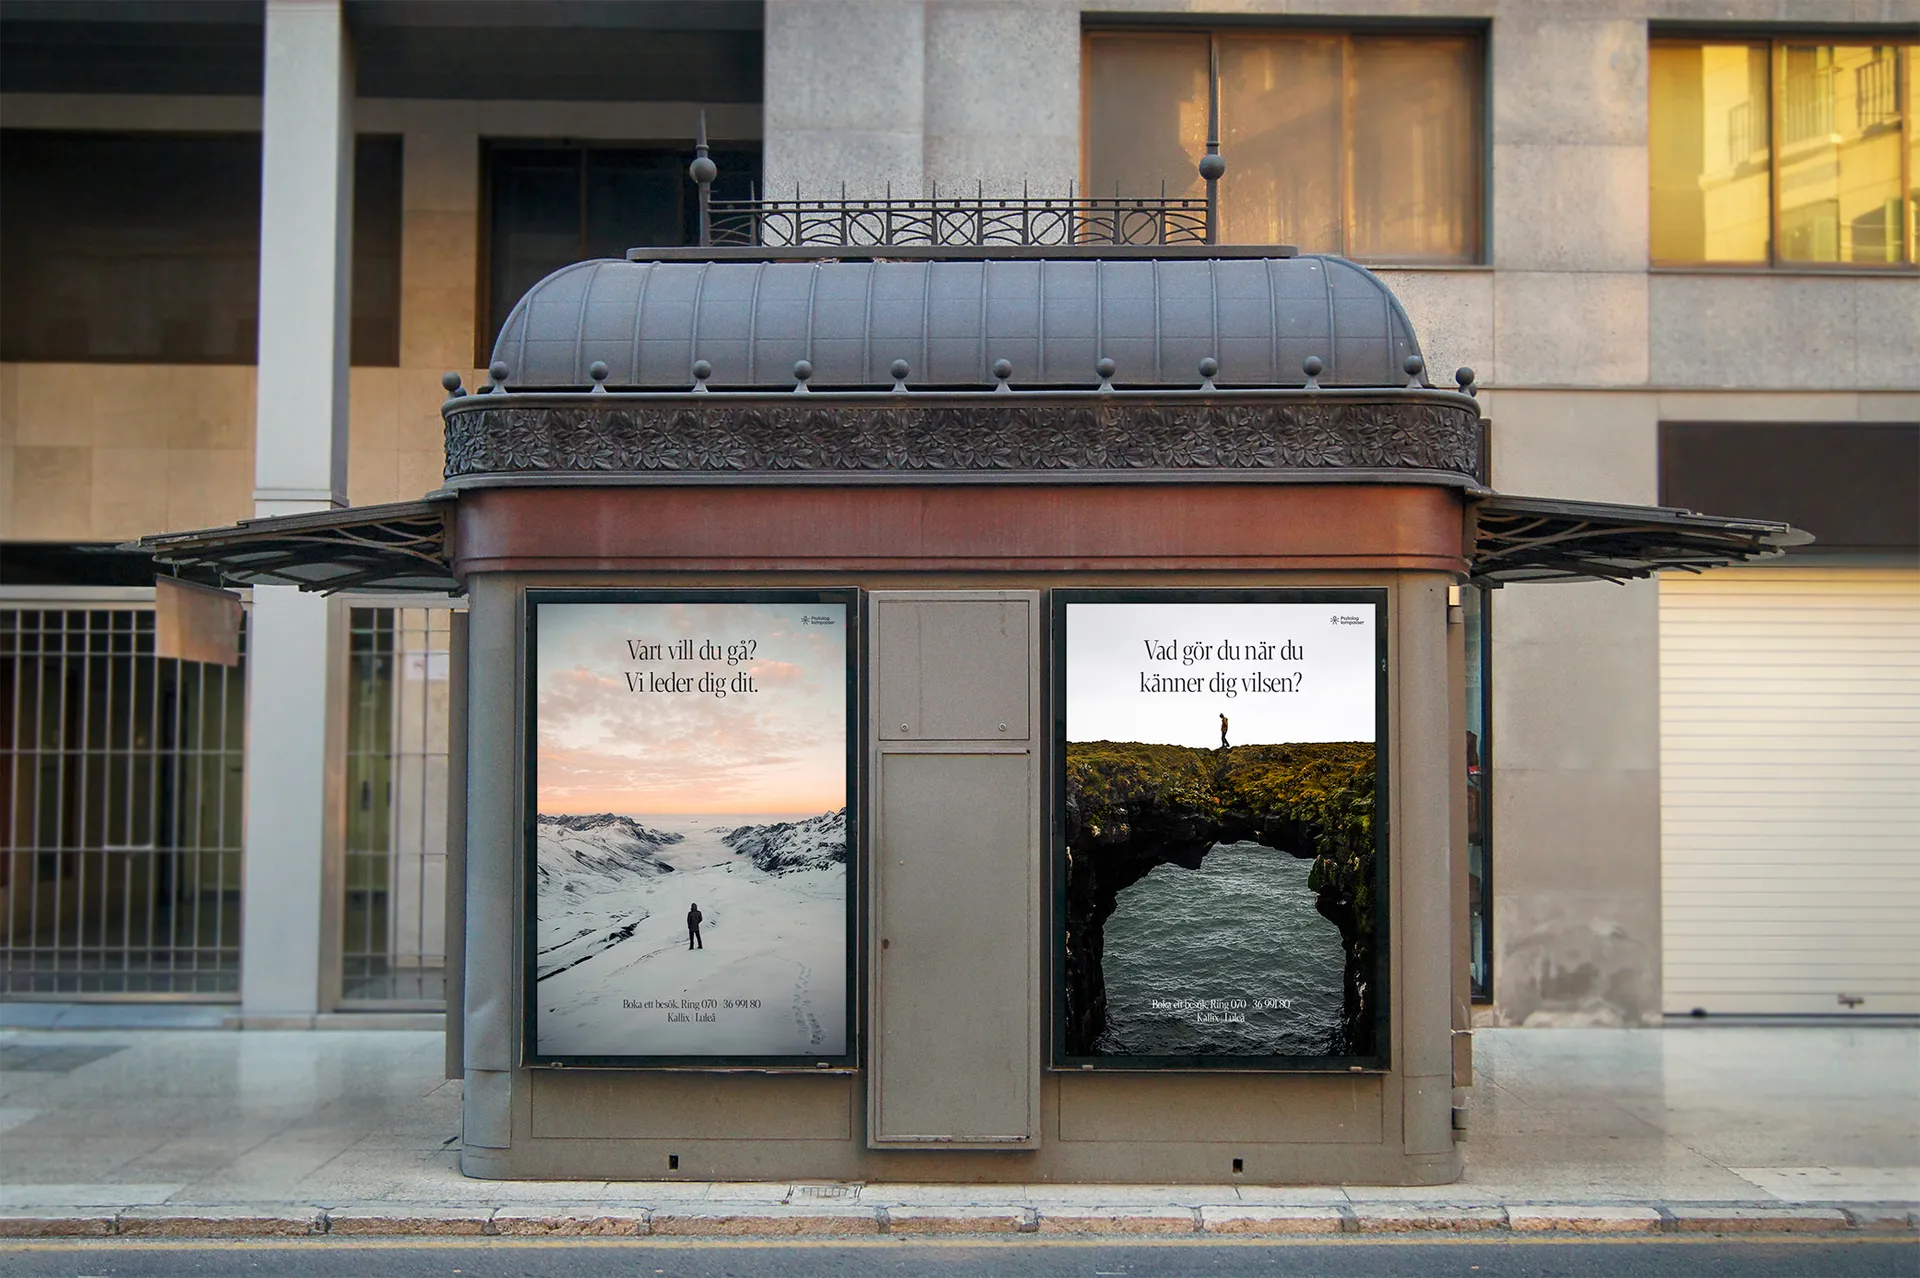 a photograph showing a newsstand booth displaying two ad posters advertising Psykologkompassen psychology office; the posters present people walking in wilderness and text in Swedish meaning "Where do you want to go? We will lead you there." and "What do you do when you feel lost?"